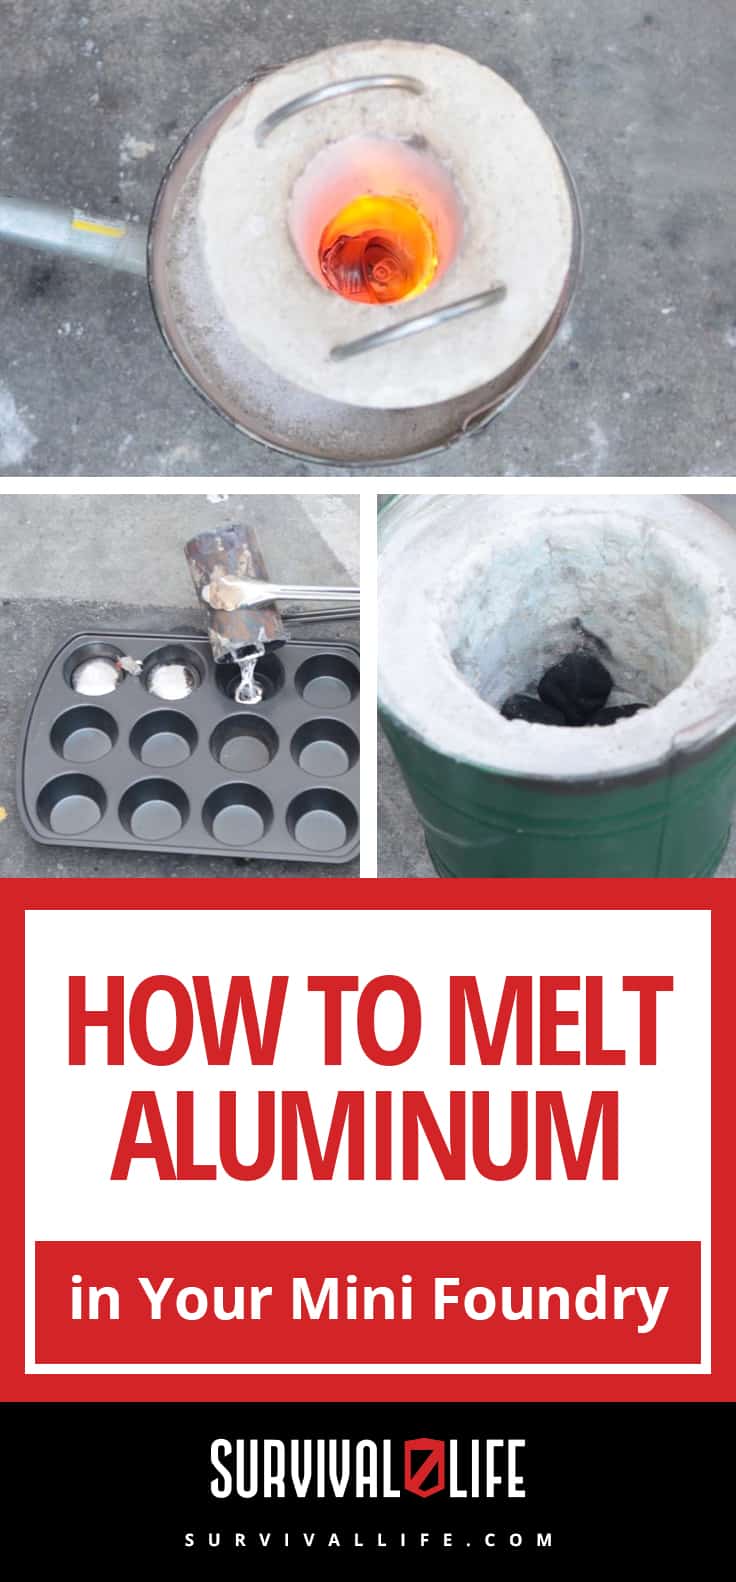 How to Melt Aluminum in Your Mini Foundry